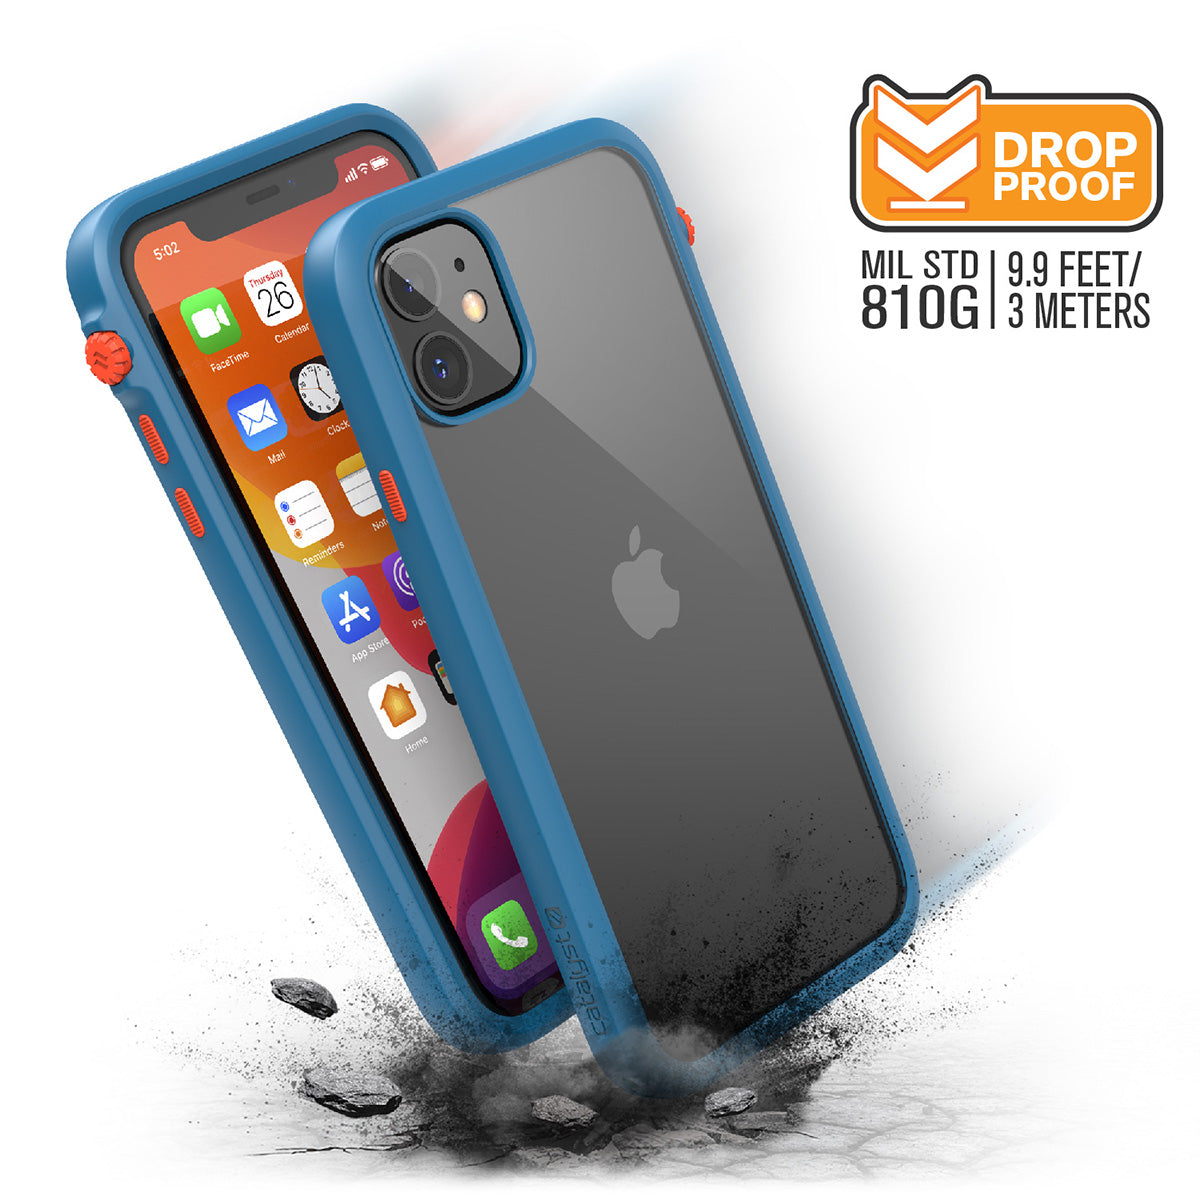 catalyst iPhone 11 series impact protection case blueridge sunset showing side views and buttons of the case with cracked floor for iPhone 11 text reads drop proof mil std 9.9 feet 810g 3 meters